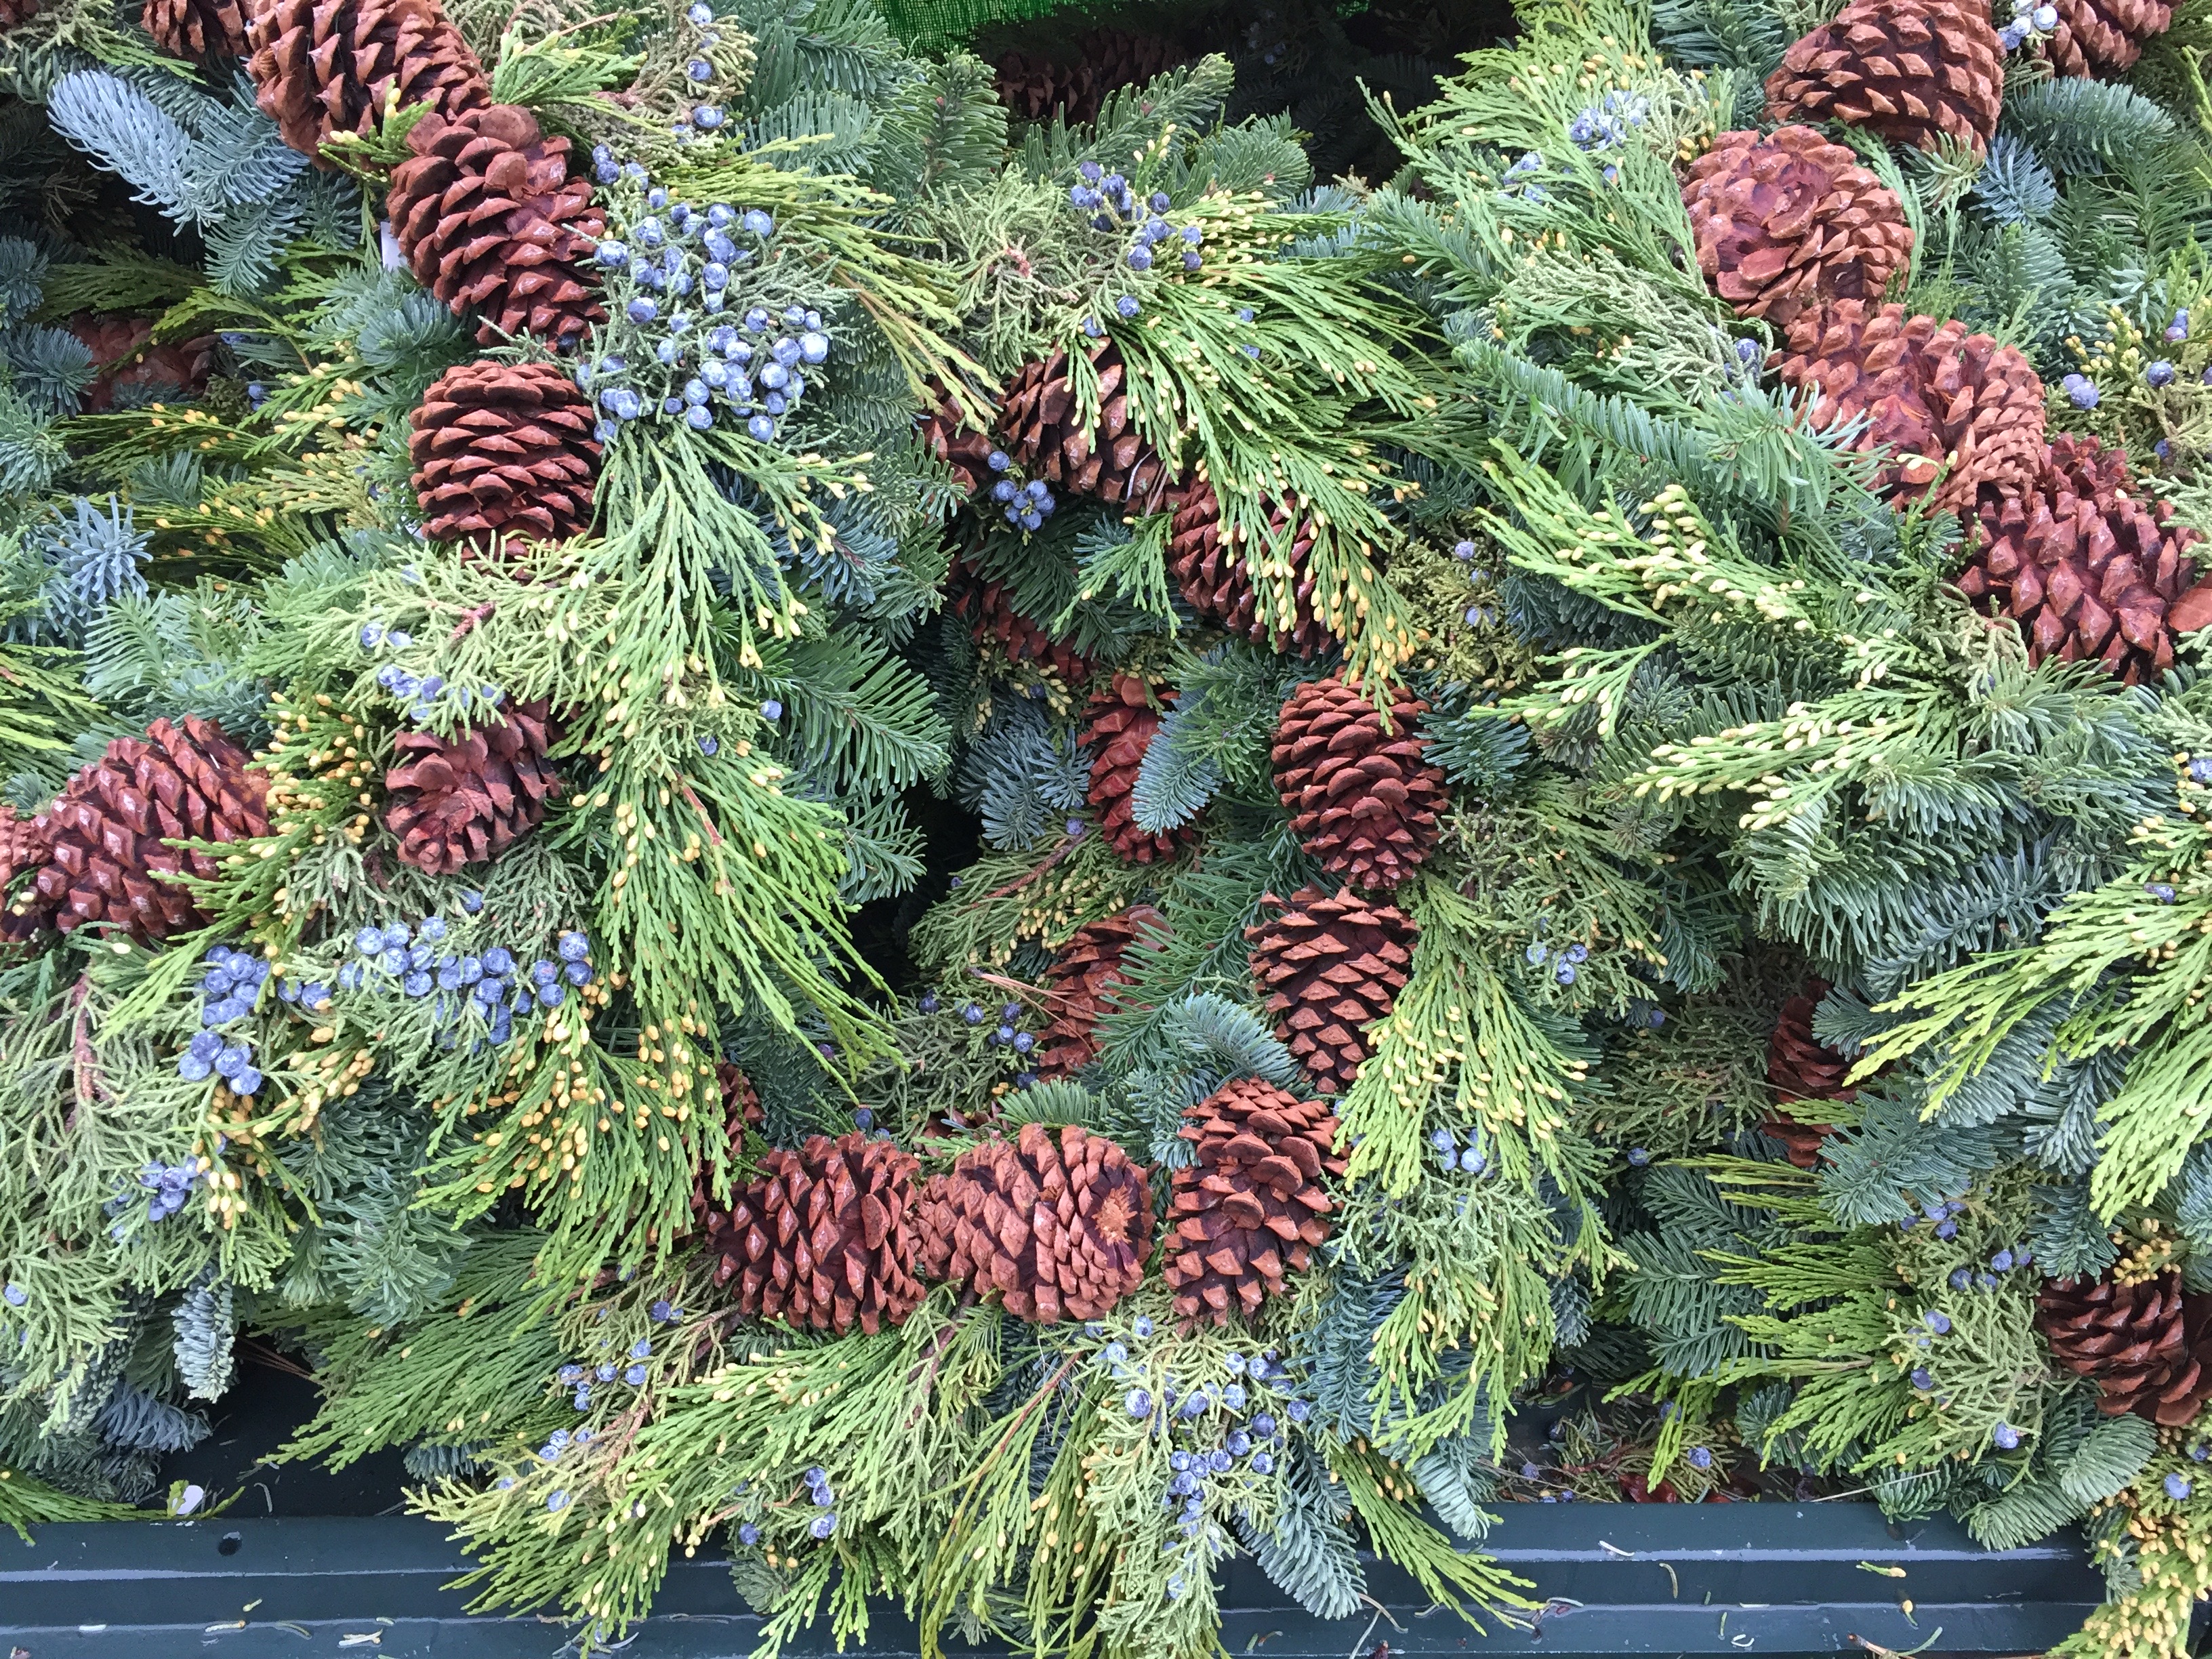 It's the Weekend, Number 82, Wreaths lined up for sale